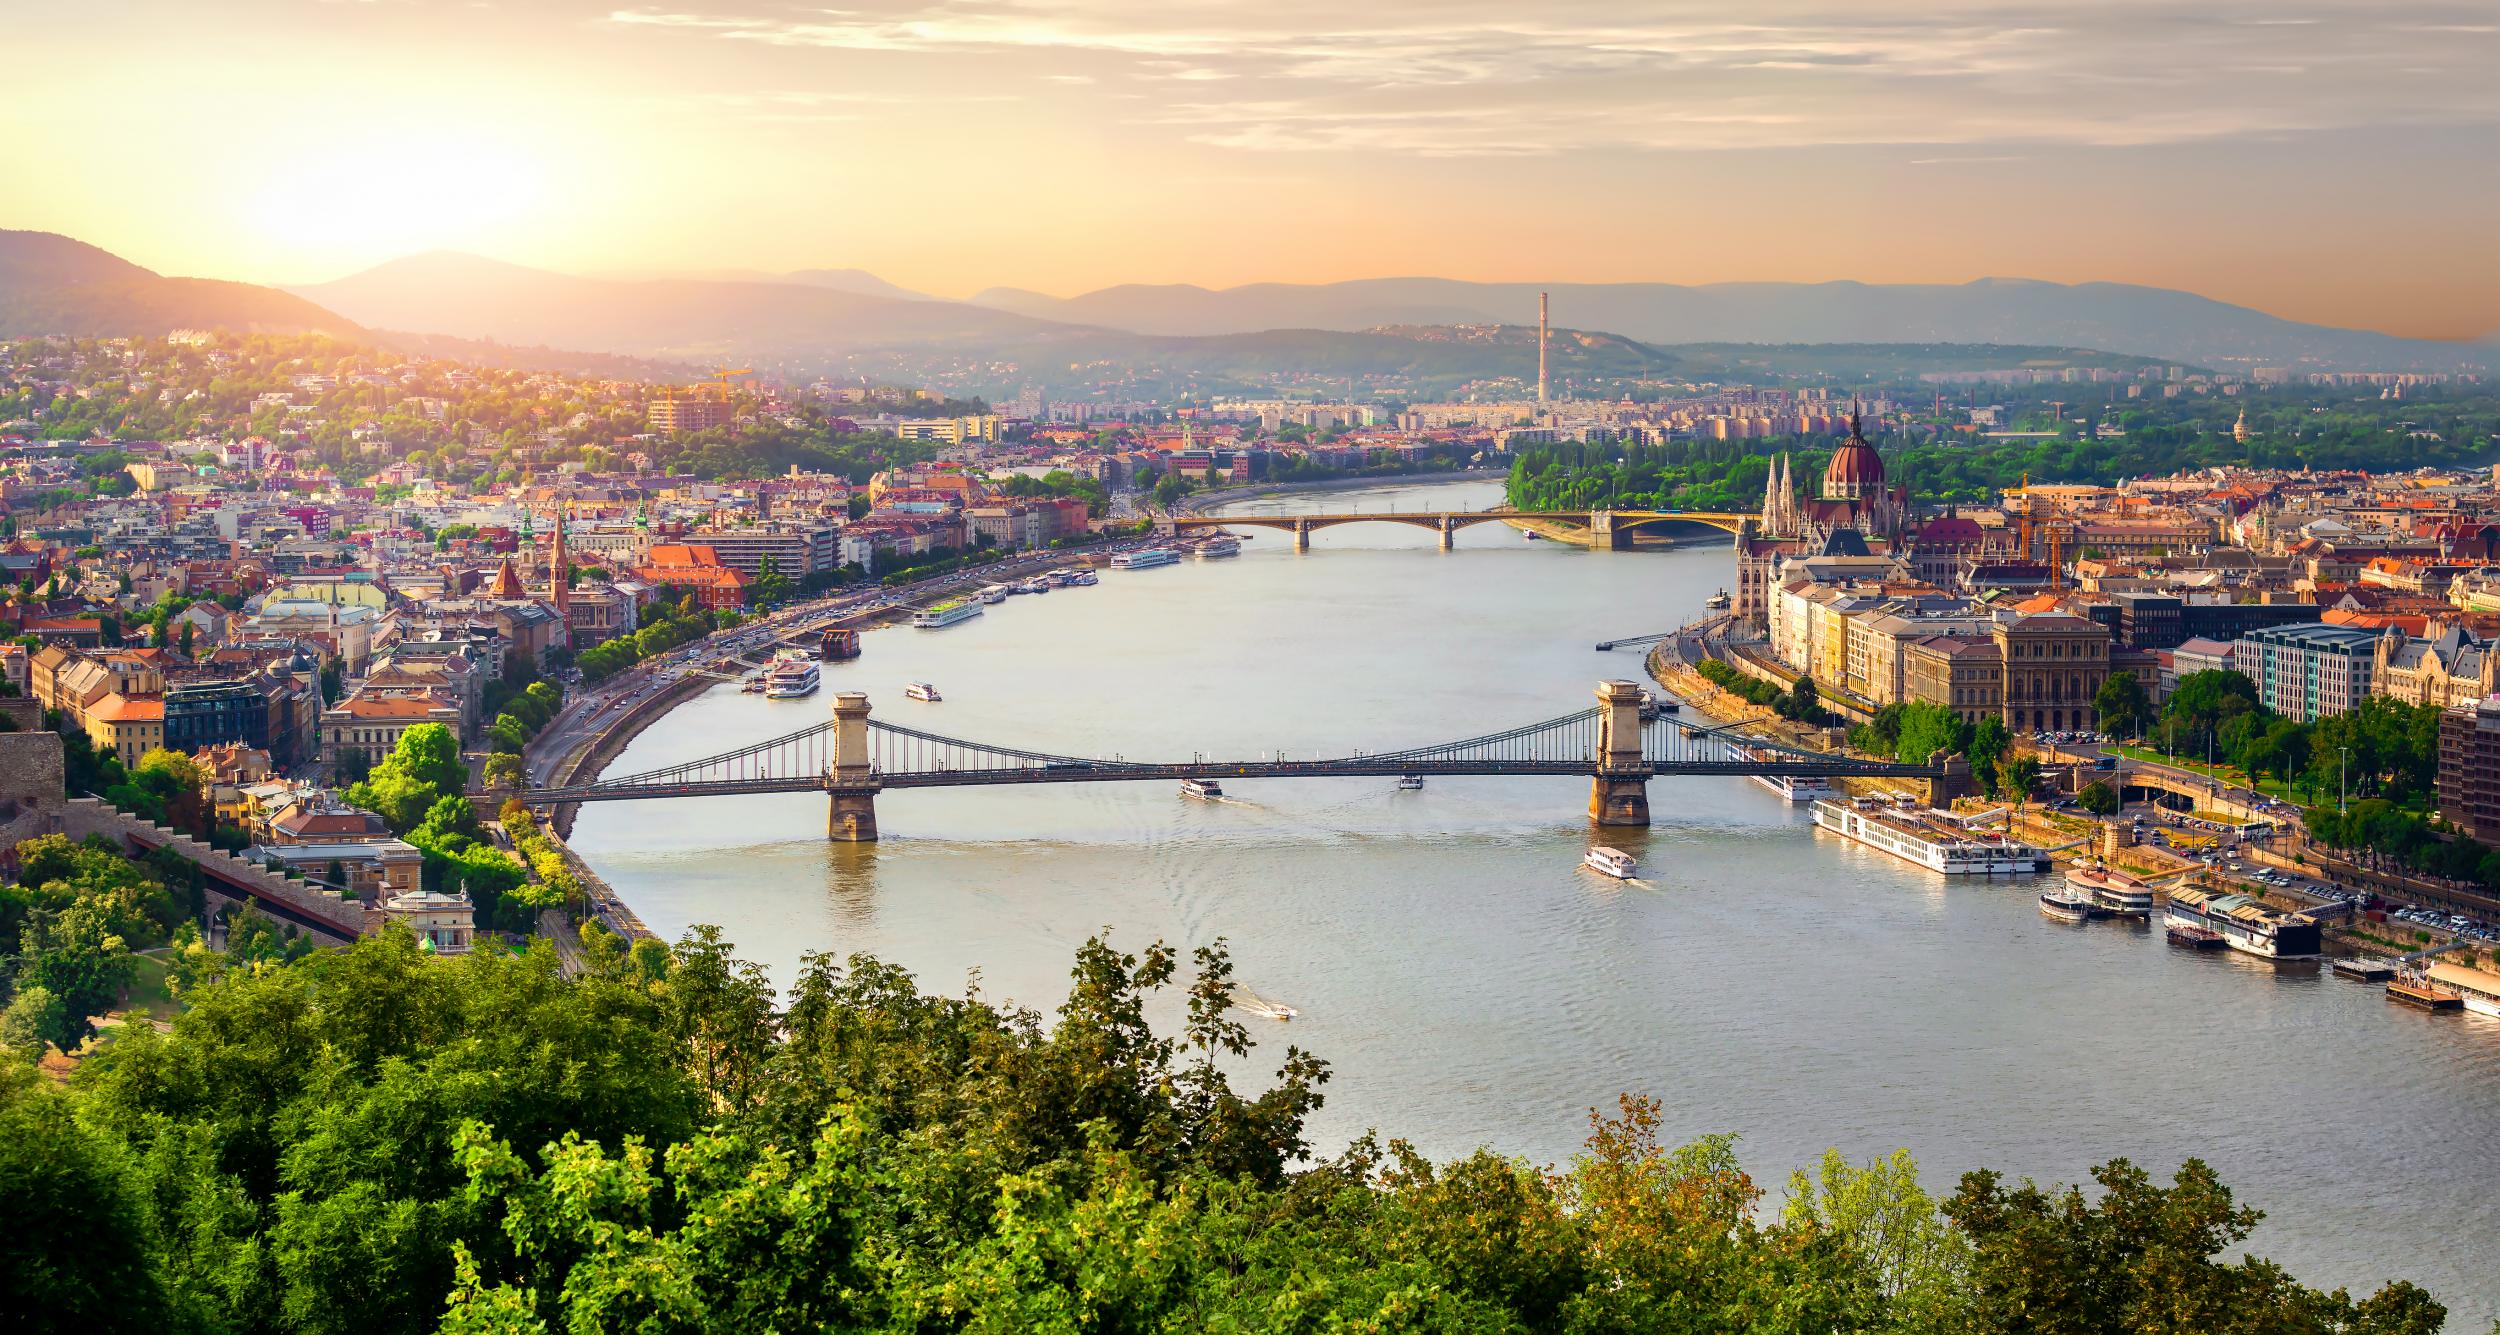 Situated on the Danube River, the Hungarian capital has plenty of budget hotel options